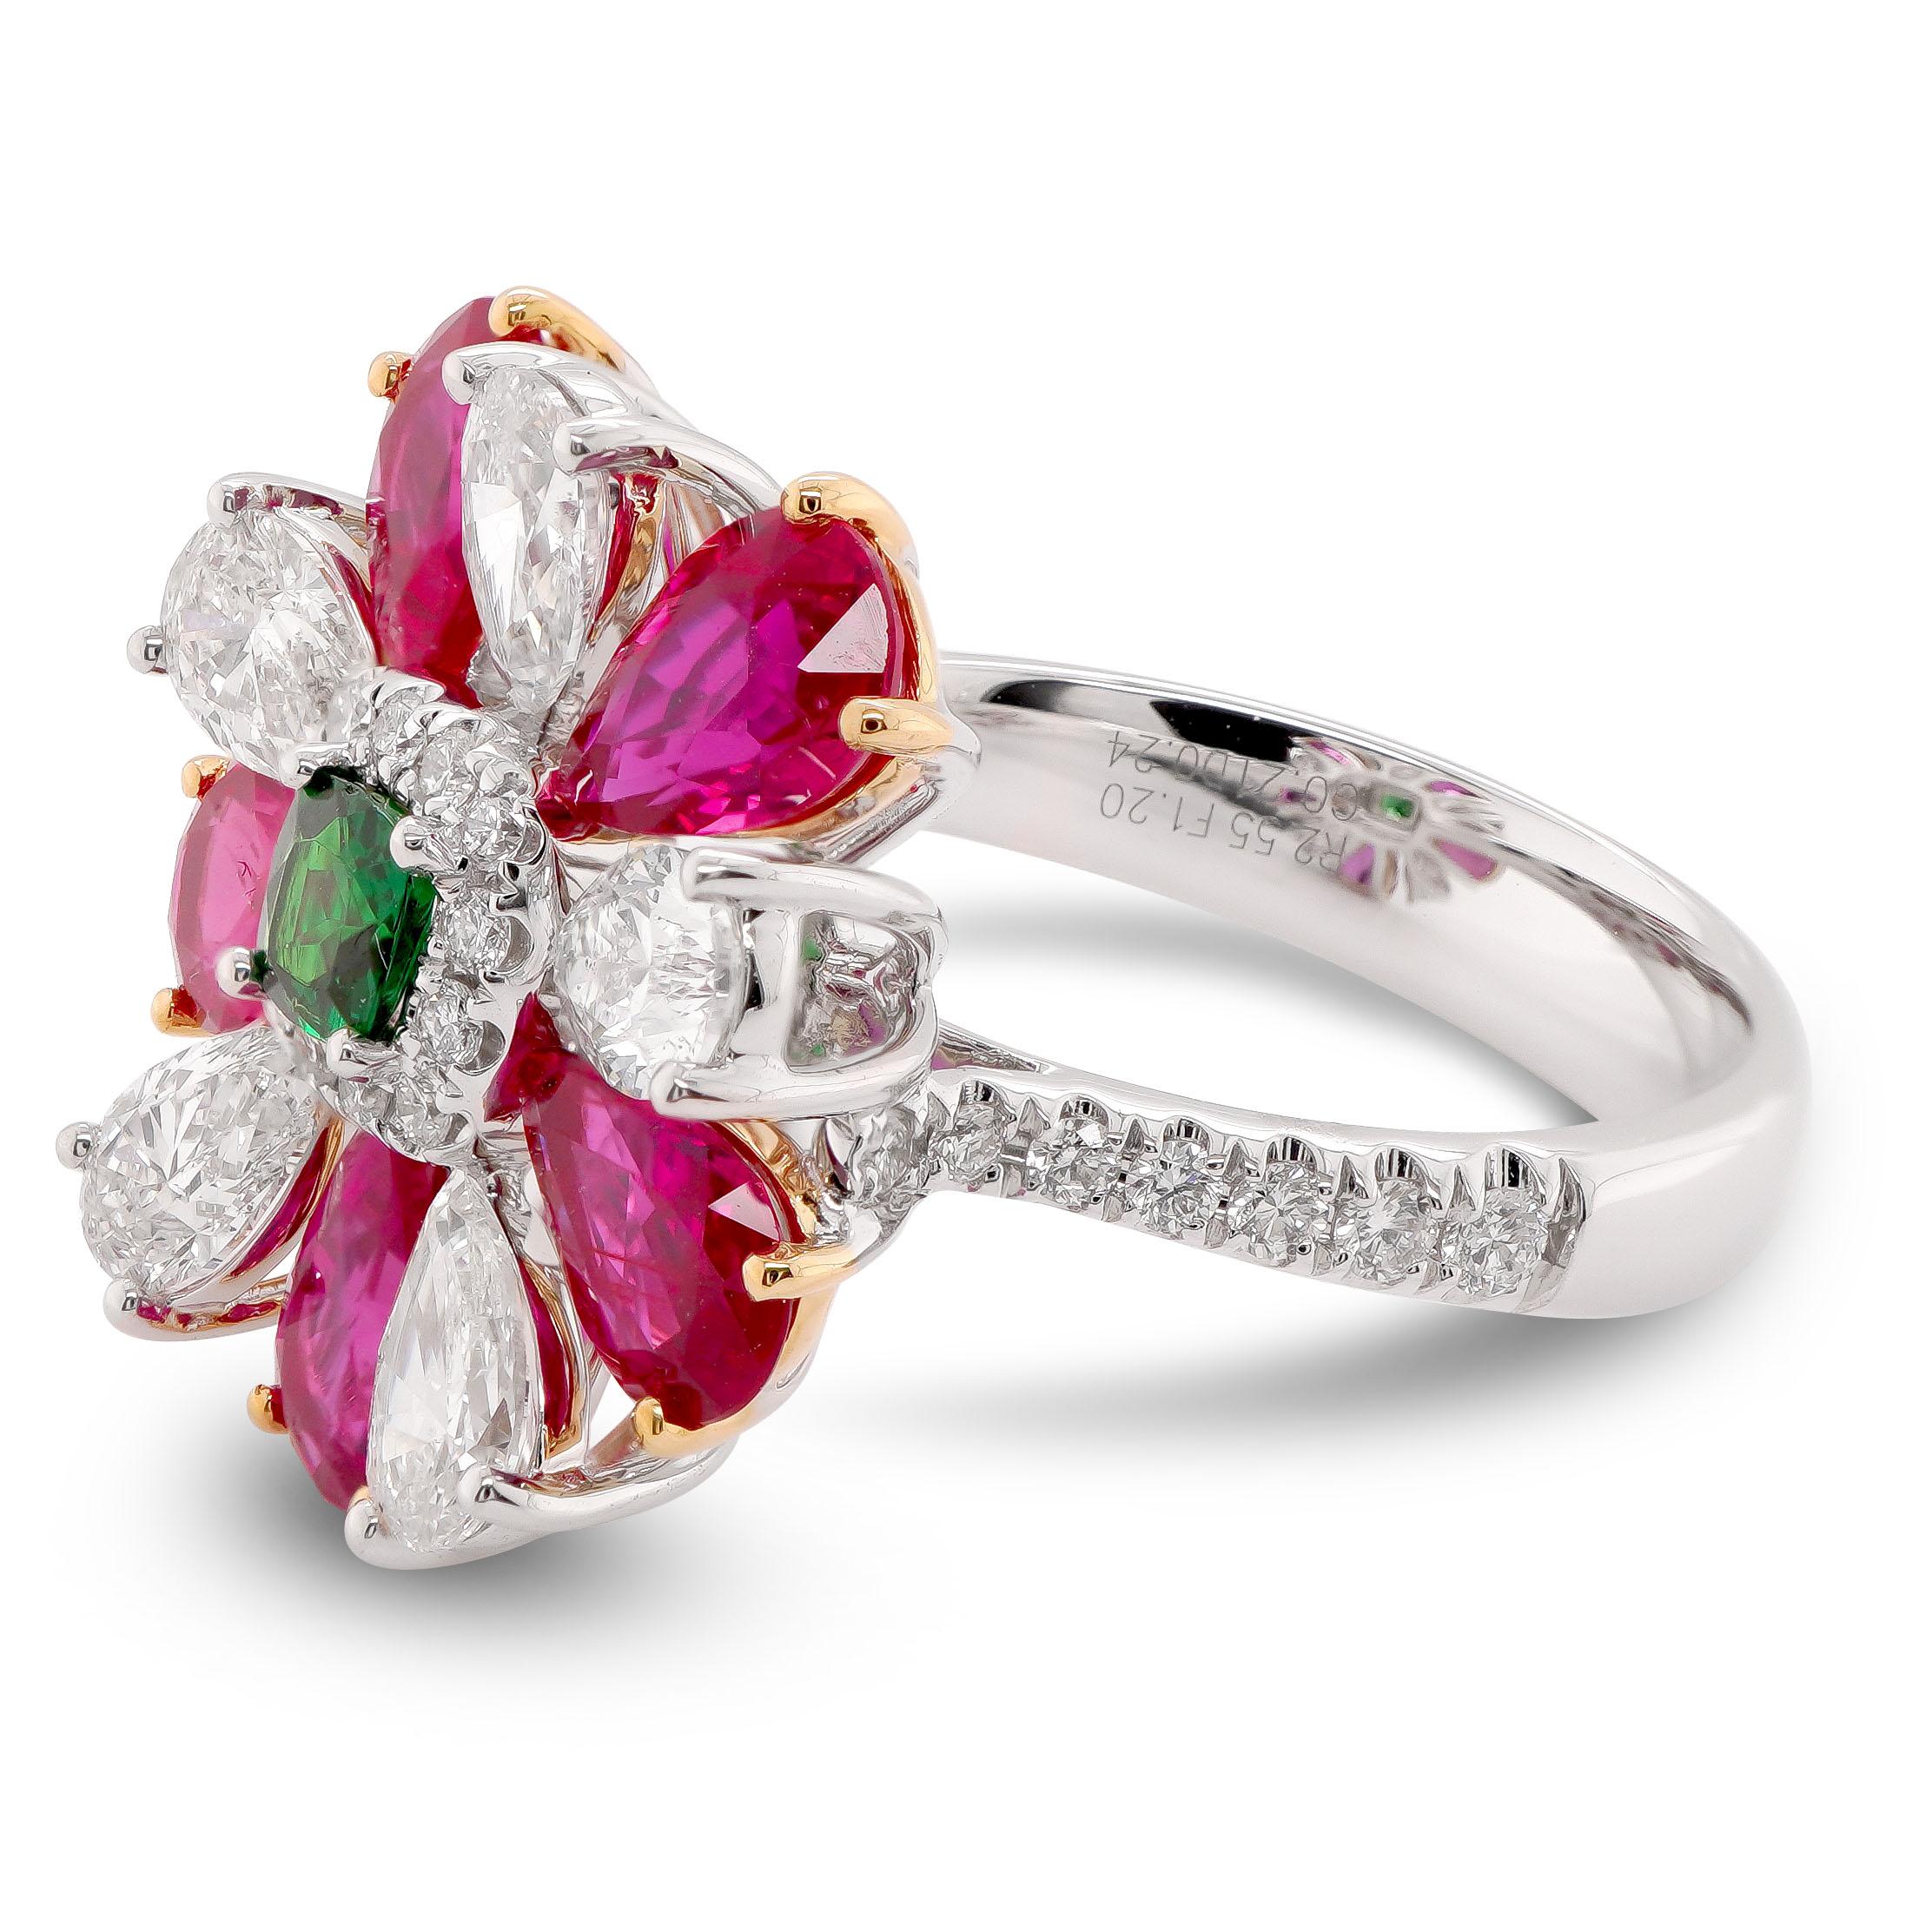 2.55 carat of vivid red ruby is set along with 1.40 carat of white diamond and 0.21 carat of Tanzanian Tsavorite in 18K ring.
The details of the diamond are mentioned below:
Color: F
Clarity: Vs
Tsavorite garnet is today one of the rarest and most